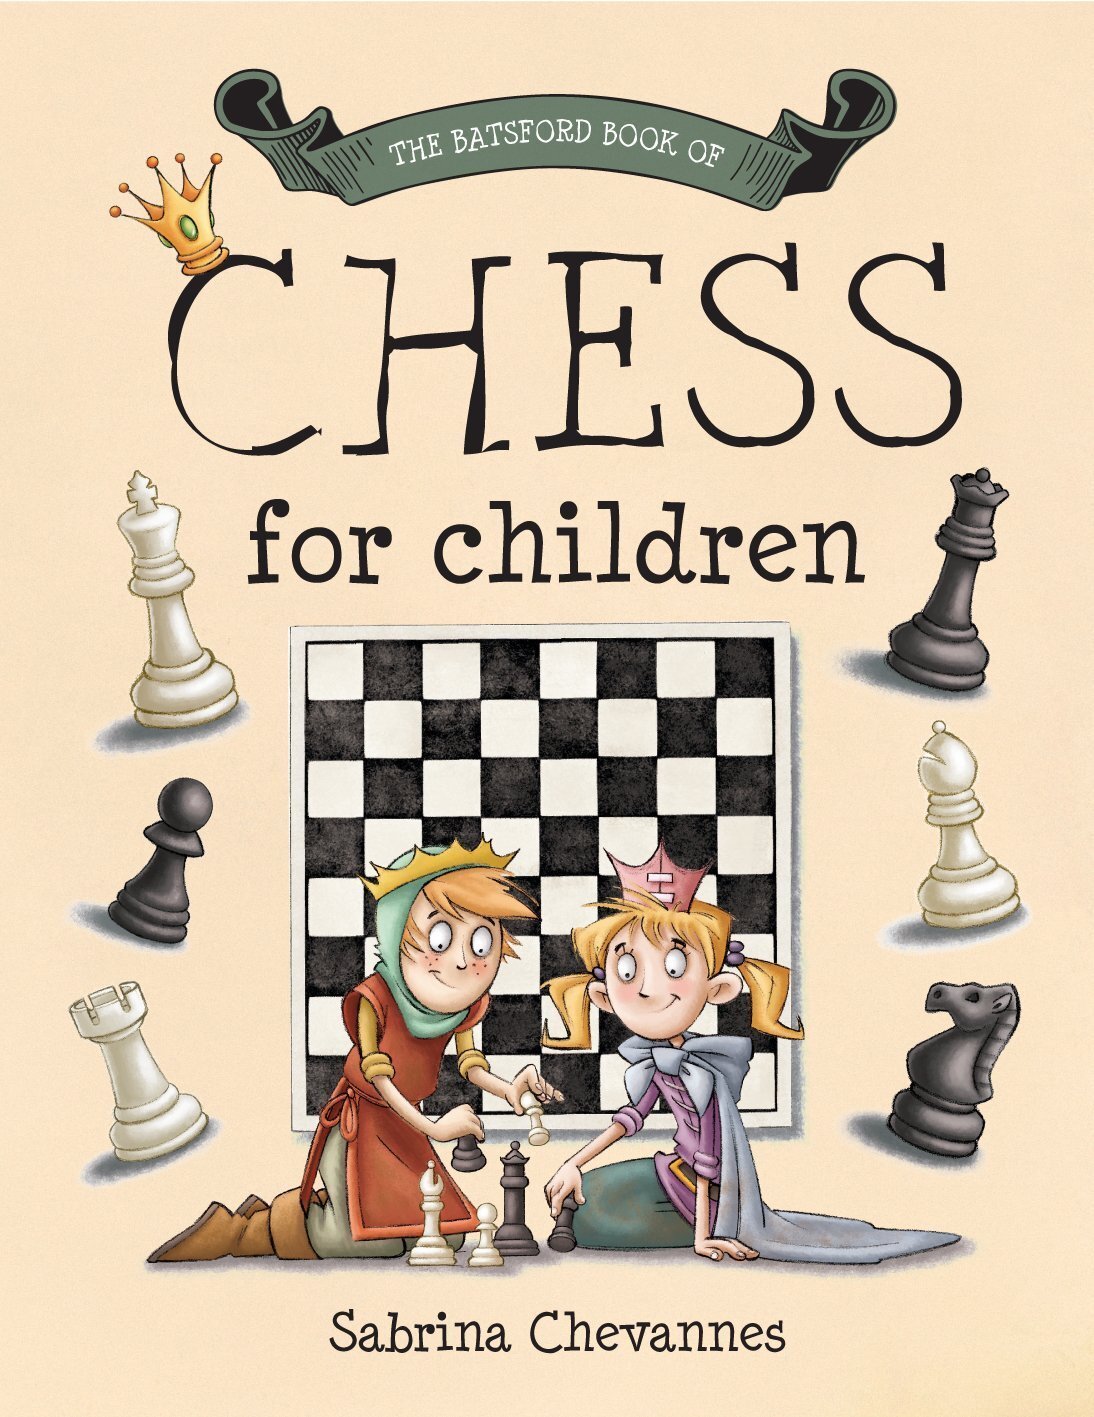 Chess Books for Kids: Free Best How to Play Chess Books for Kids